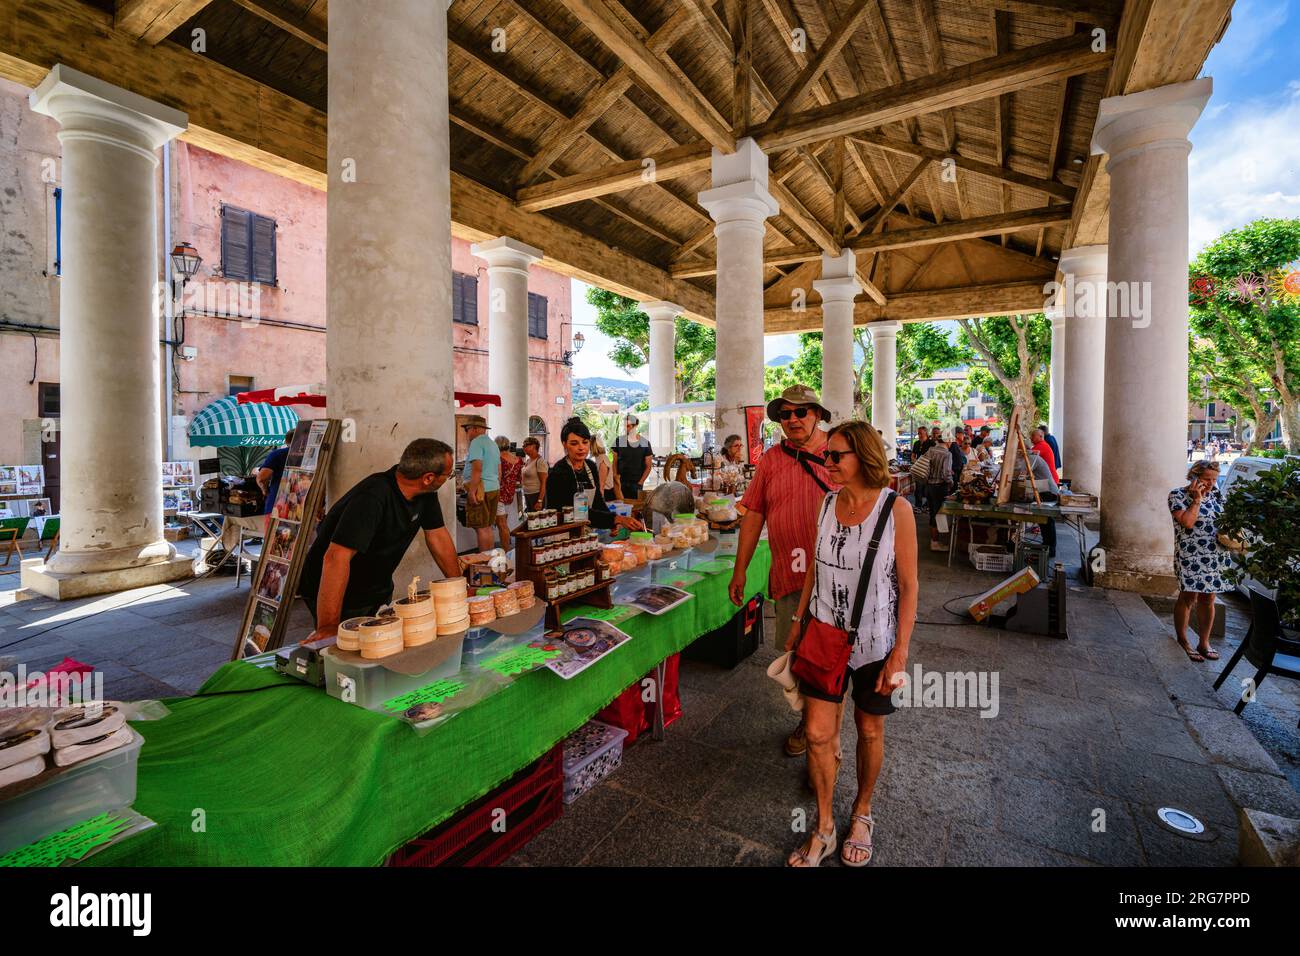 At a market place in L'Île-Rousse, Corsica island, France Stock Photo